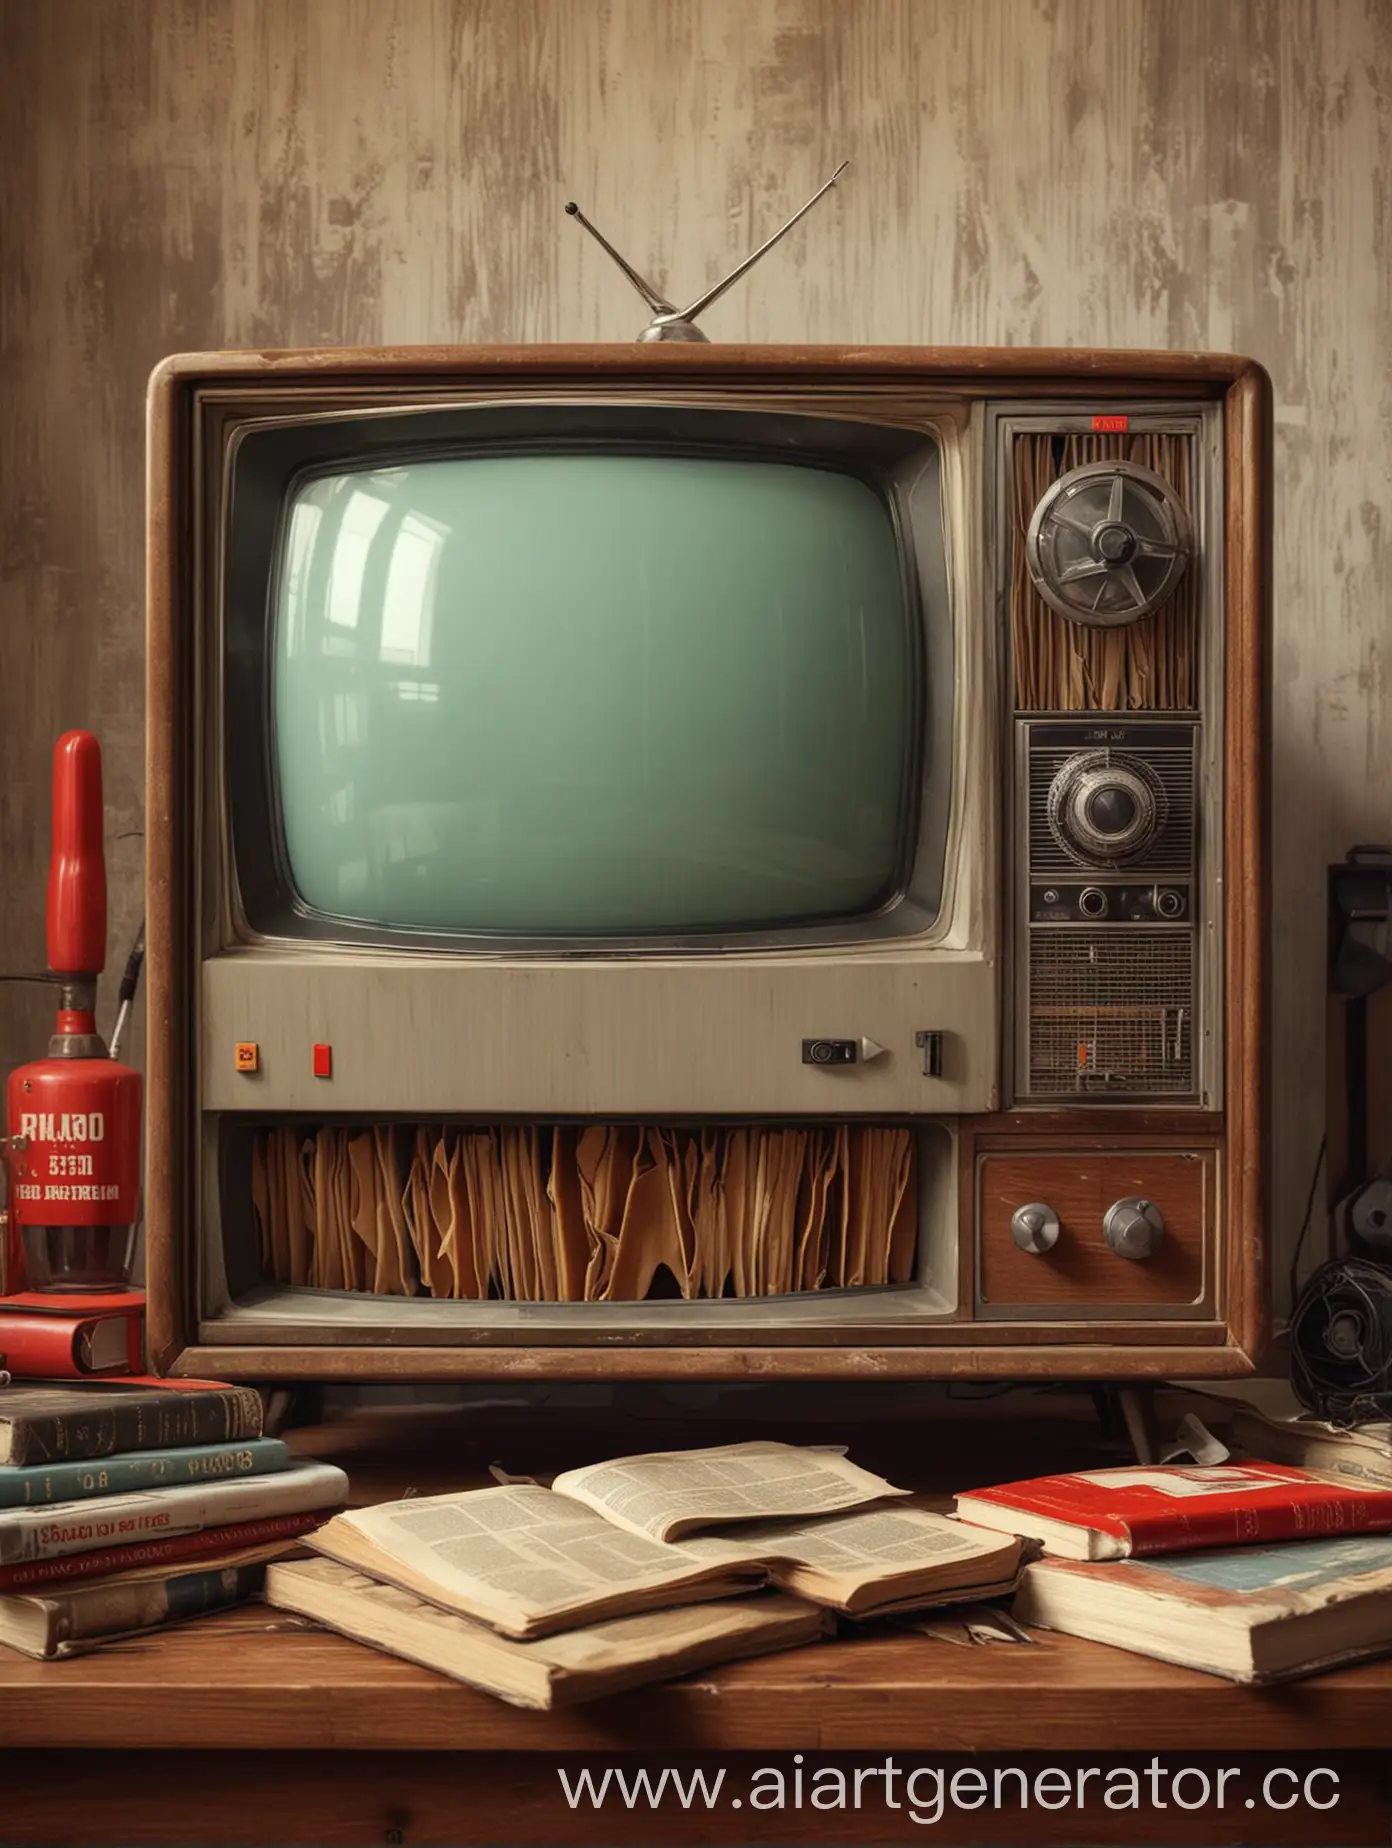 Vintage-Soviet-Television-Set-with-Books-in-1960s-Apartment-Interior